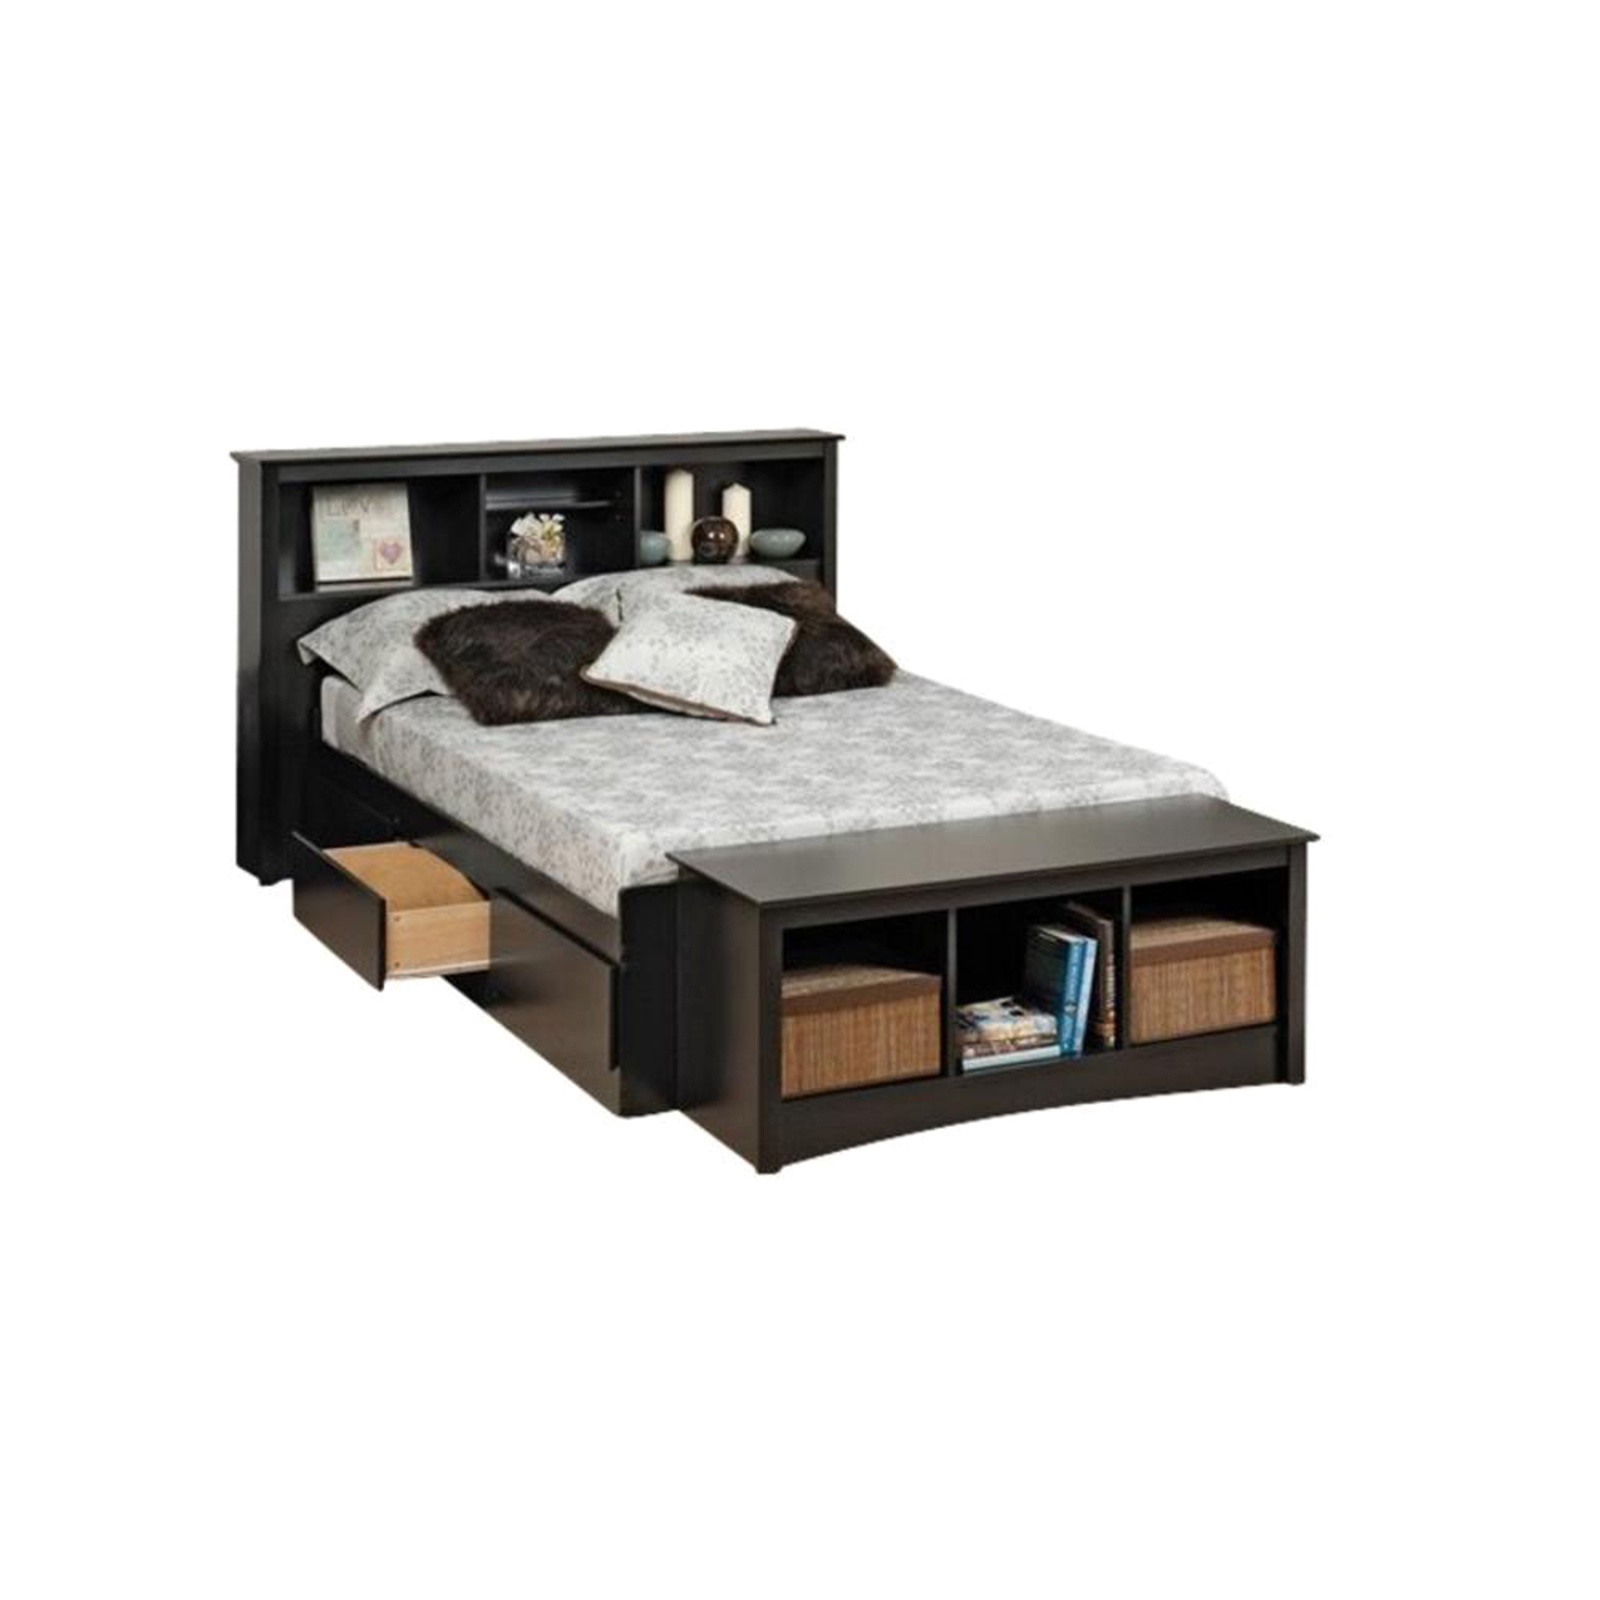 Bowery Hill Queen Platform Bed with Bookcase and Storage - Black Laminate